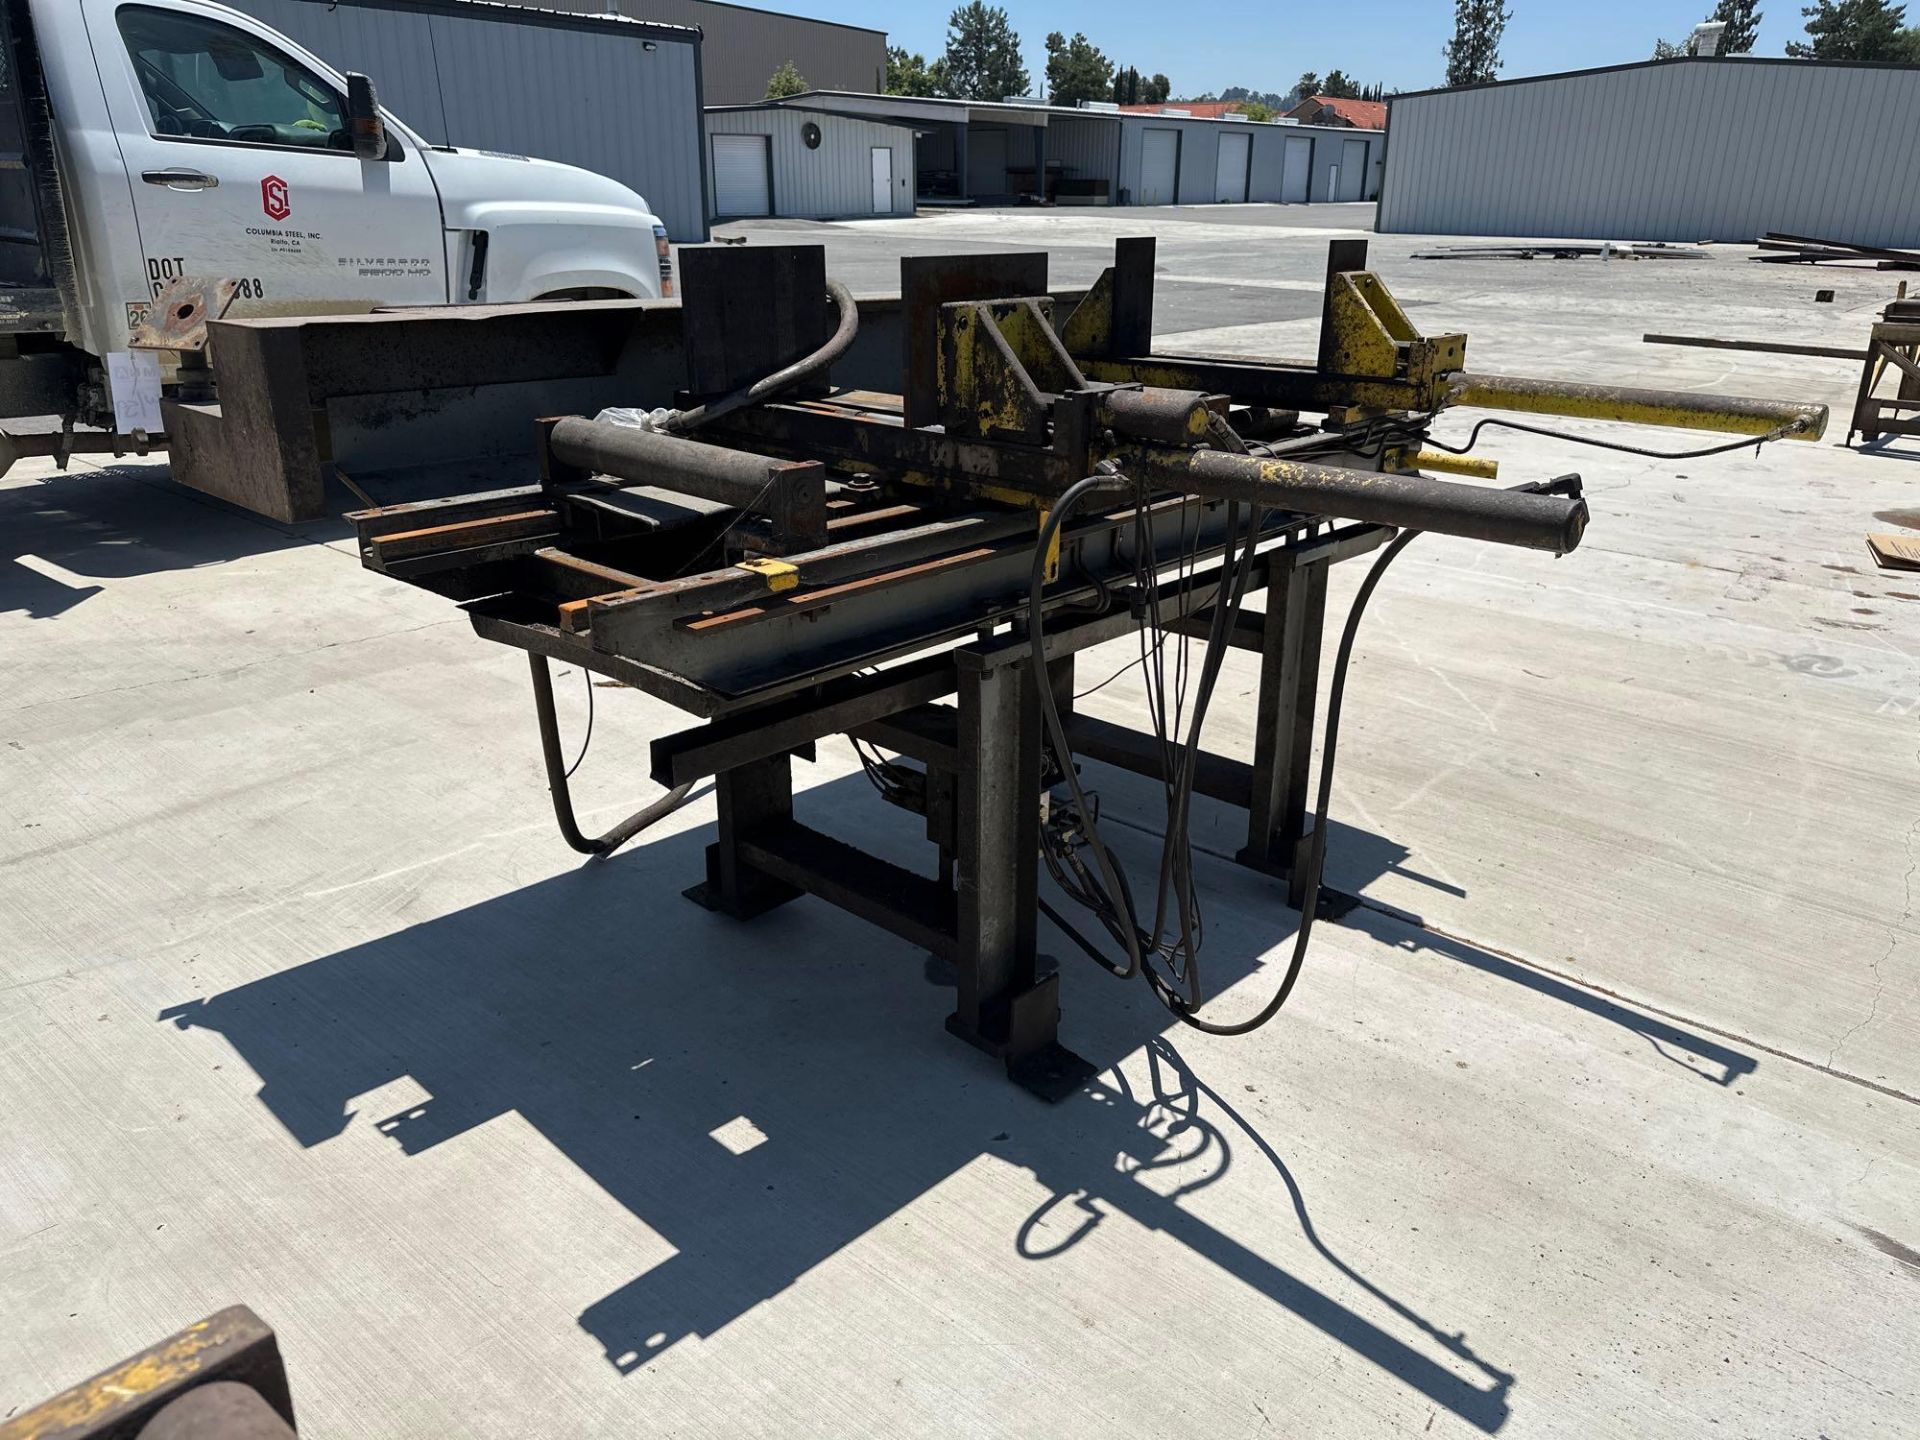 Marvel Series 2150A-PC60 Tilt Frame Vertical Band Saw, 2’ x 7’ Conveyor *Located in Redlands, CA* - Image 23 of 25